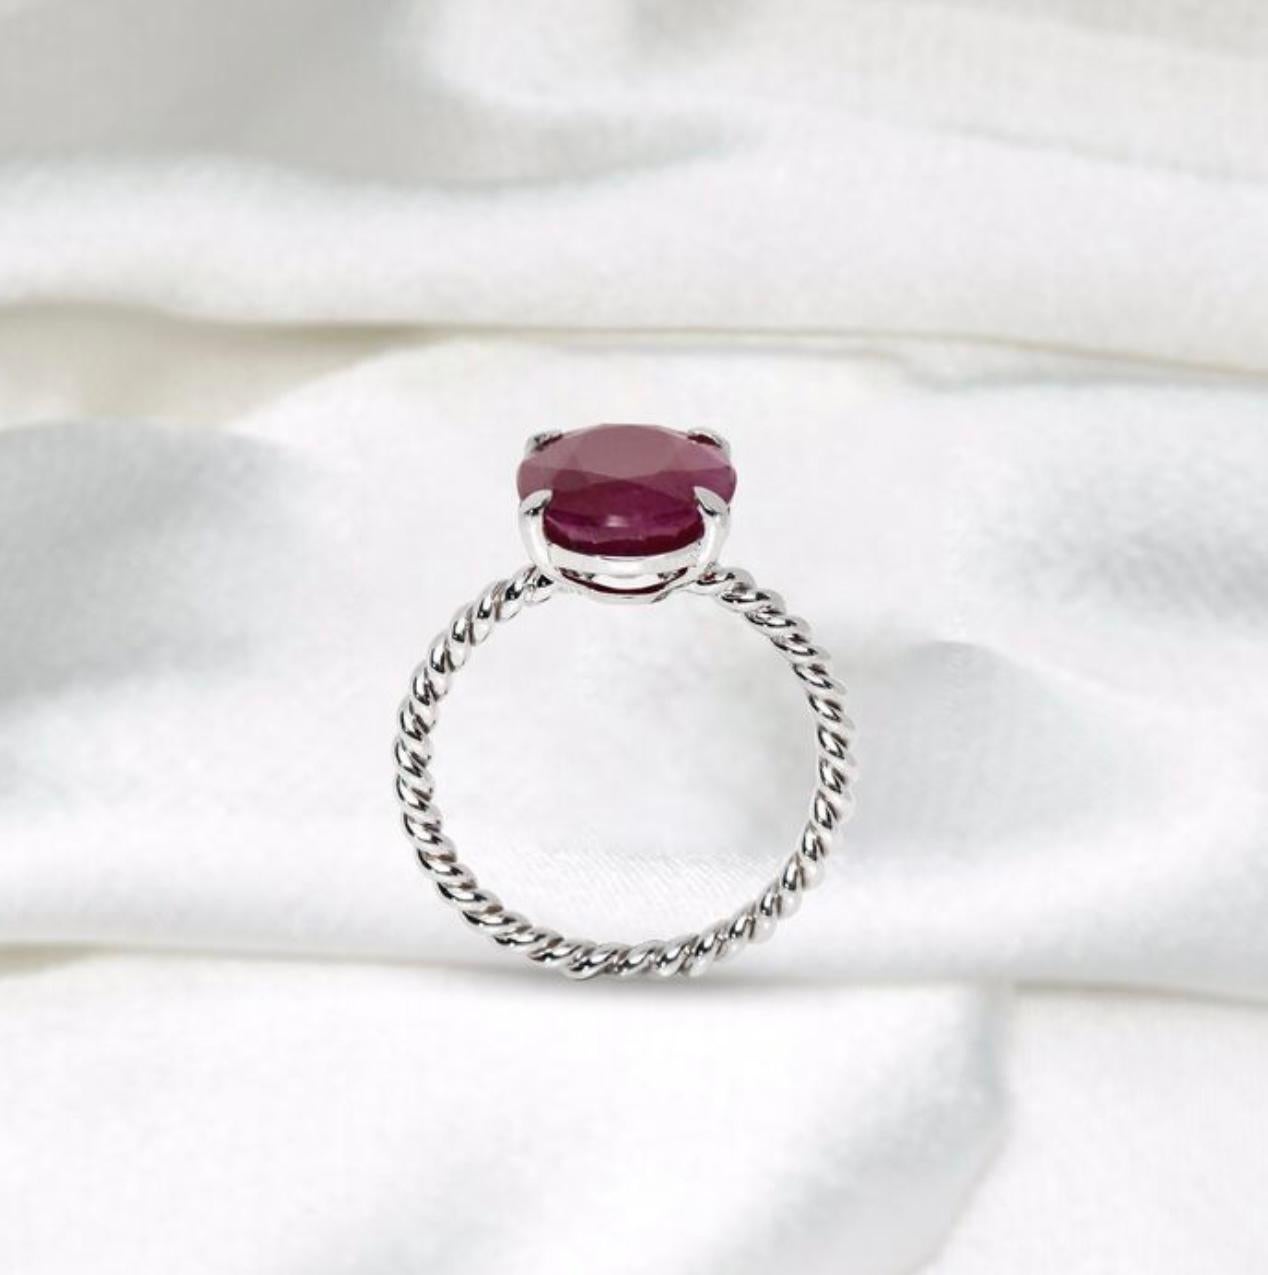 Oval Cut  Ruby Ring 14 Karat White Gold  Not Heated/ Not Treated Ruby, Certified Gem For Sale